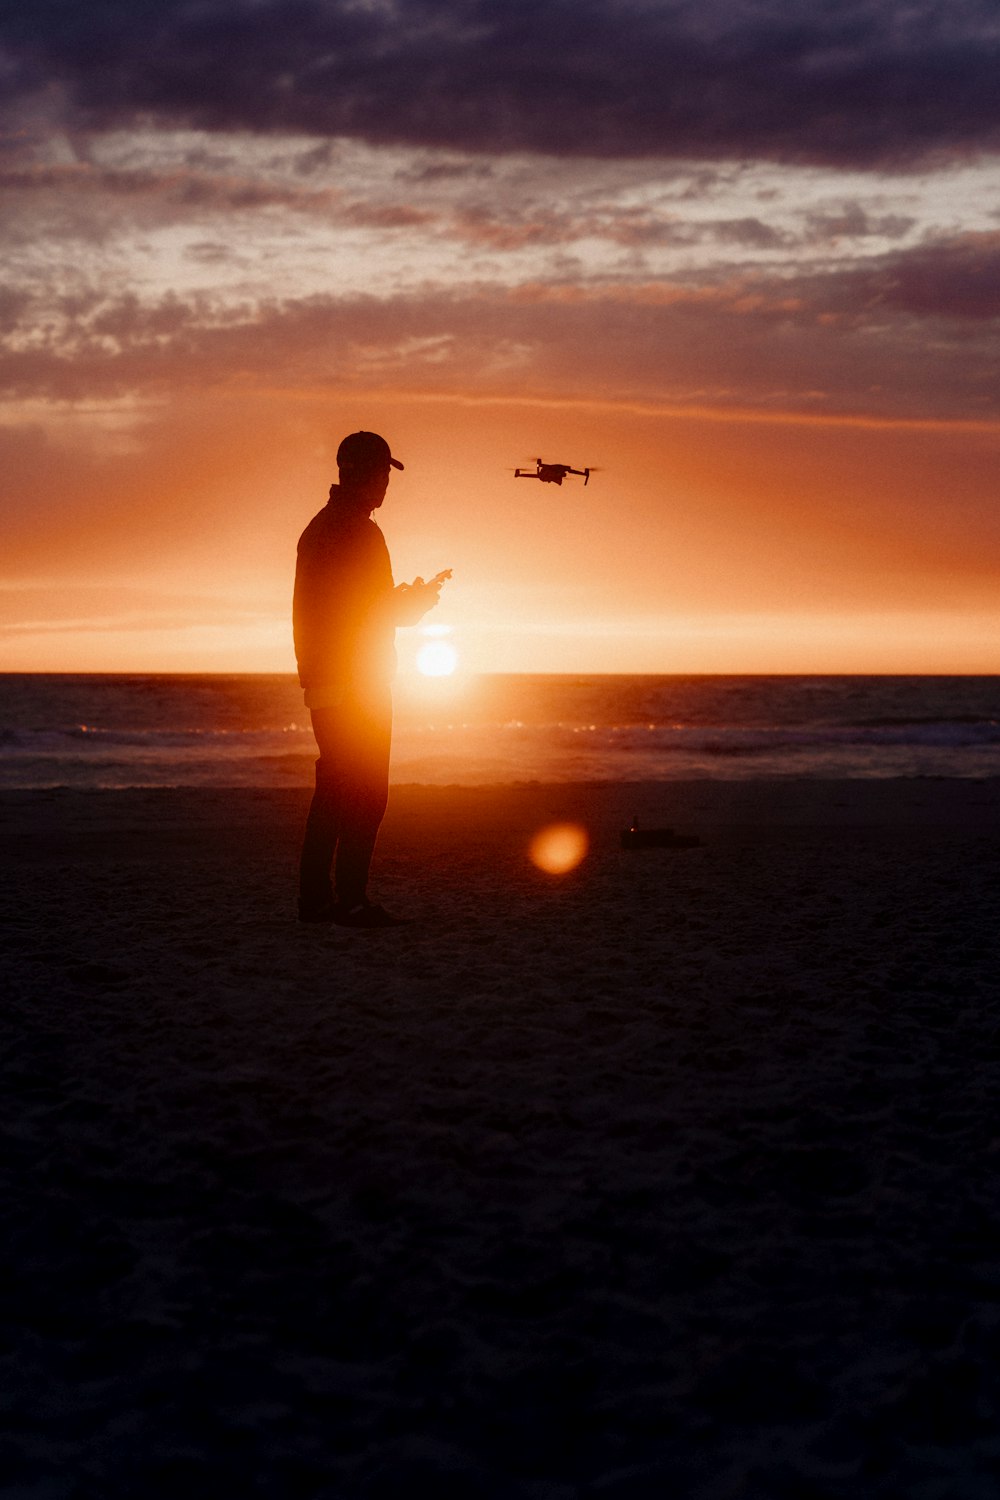 a person standing on a beach with a plane flying in the sky